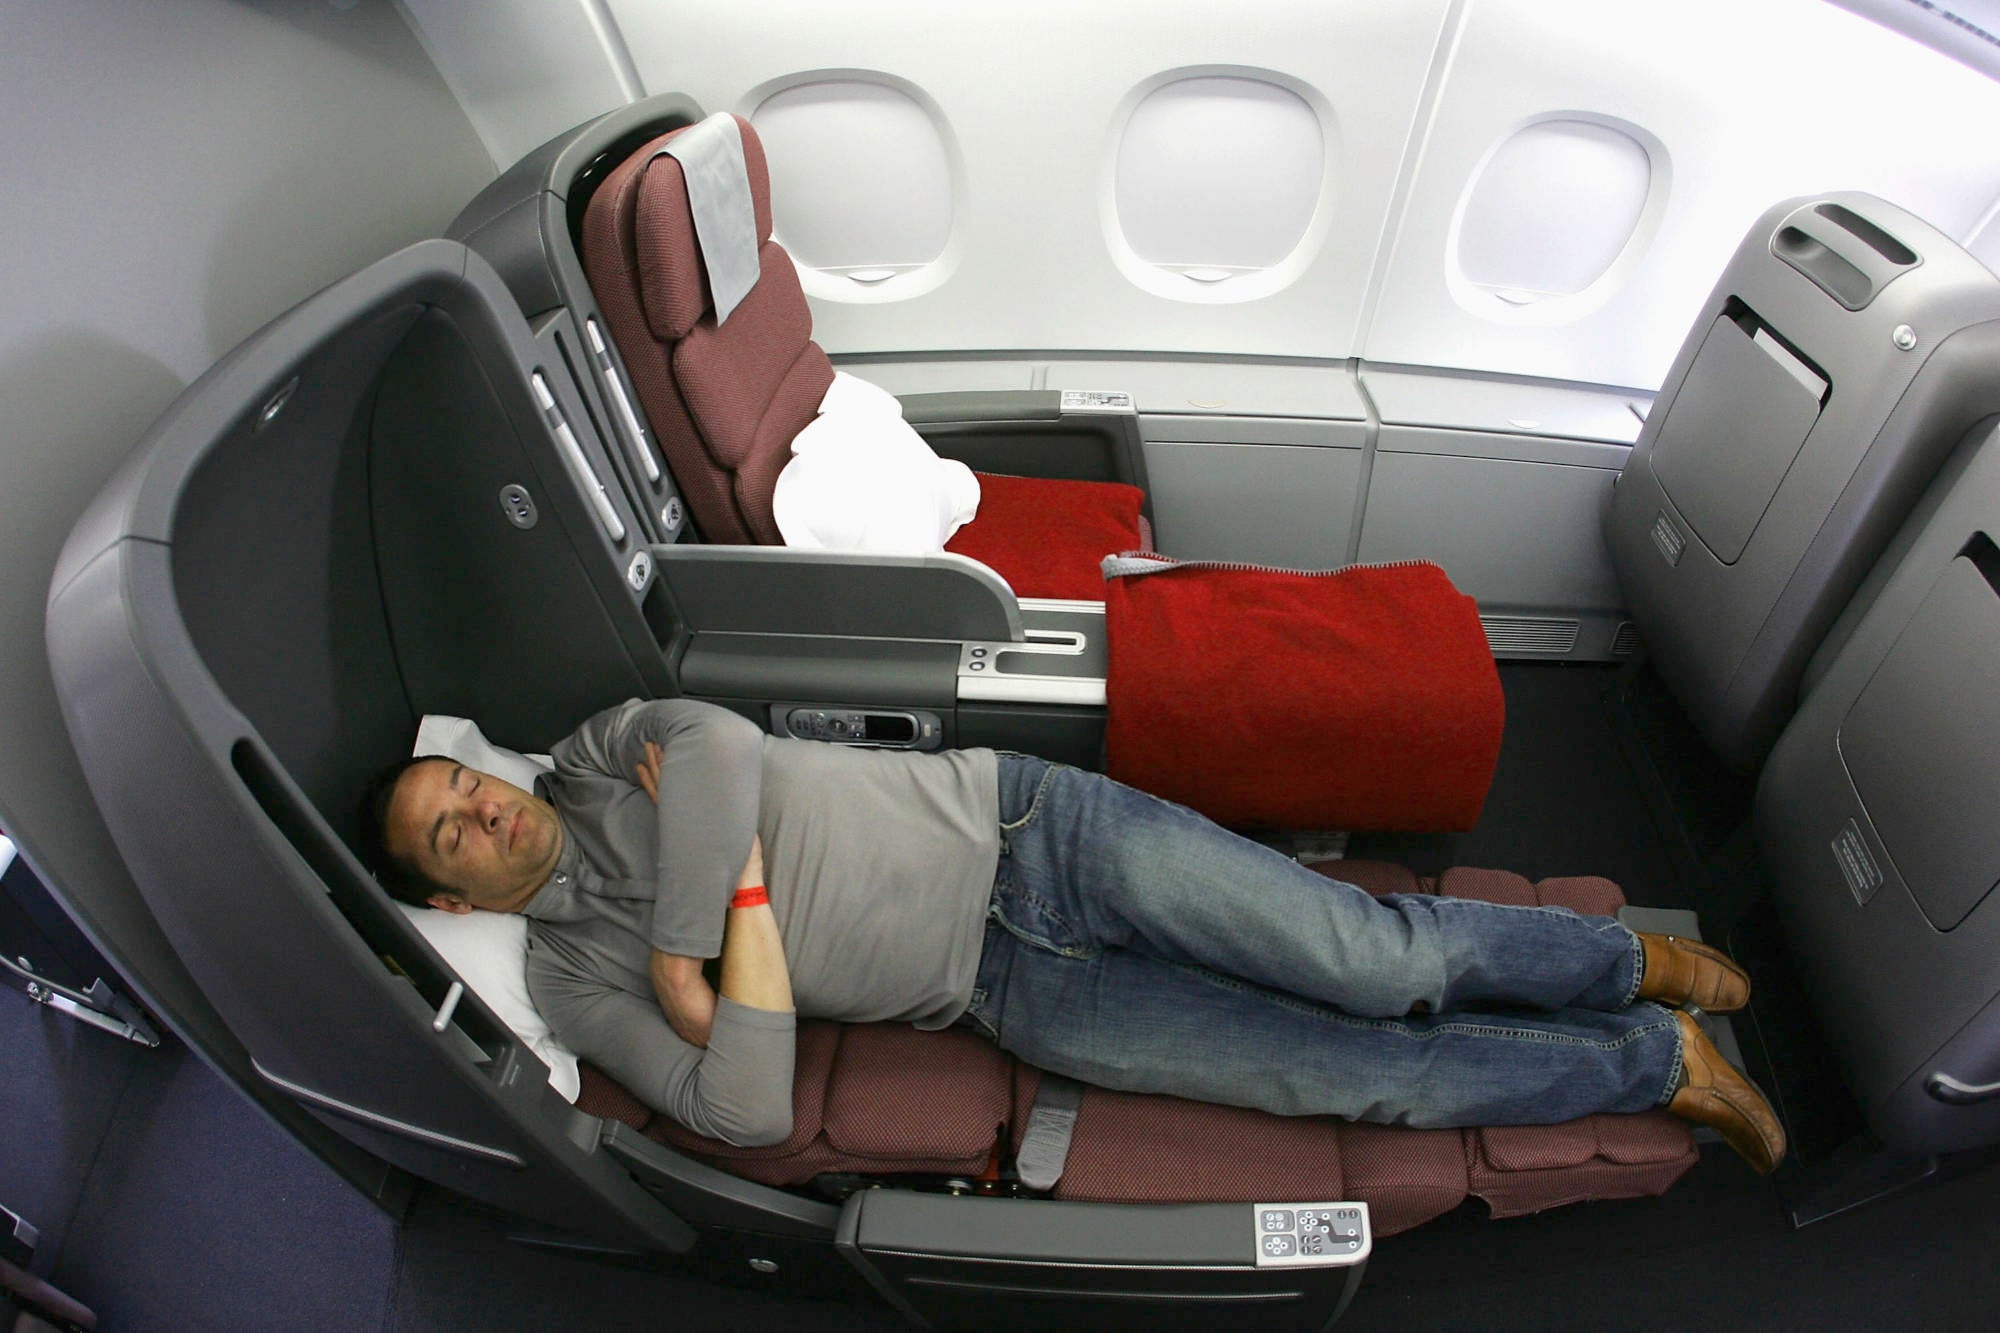 Tips on how to avoid jet lag for your next trip